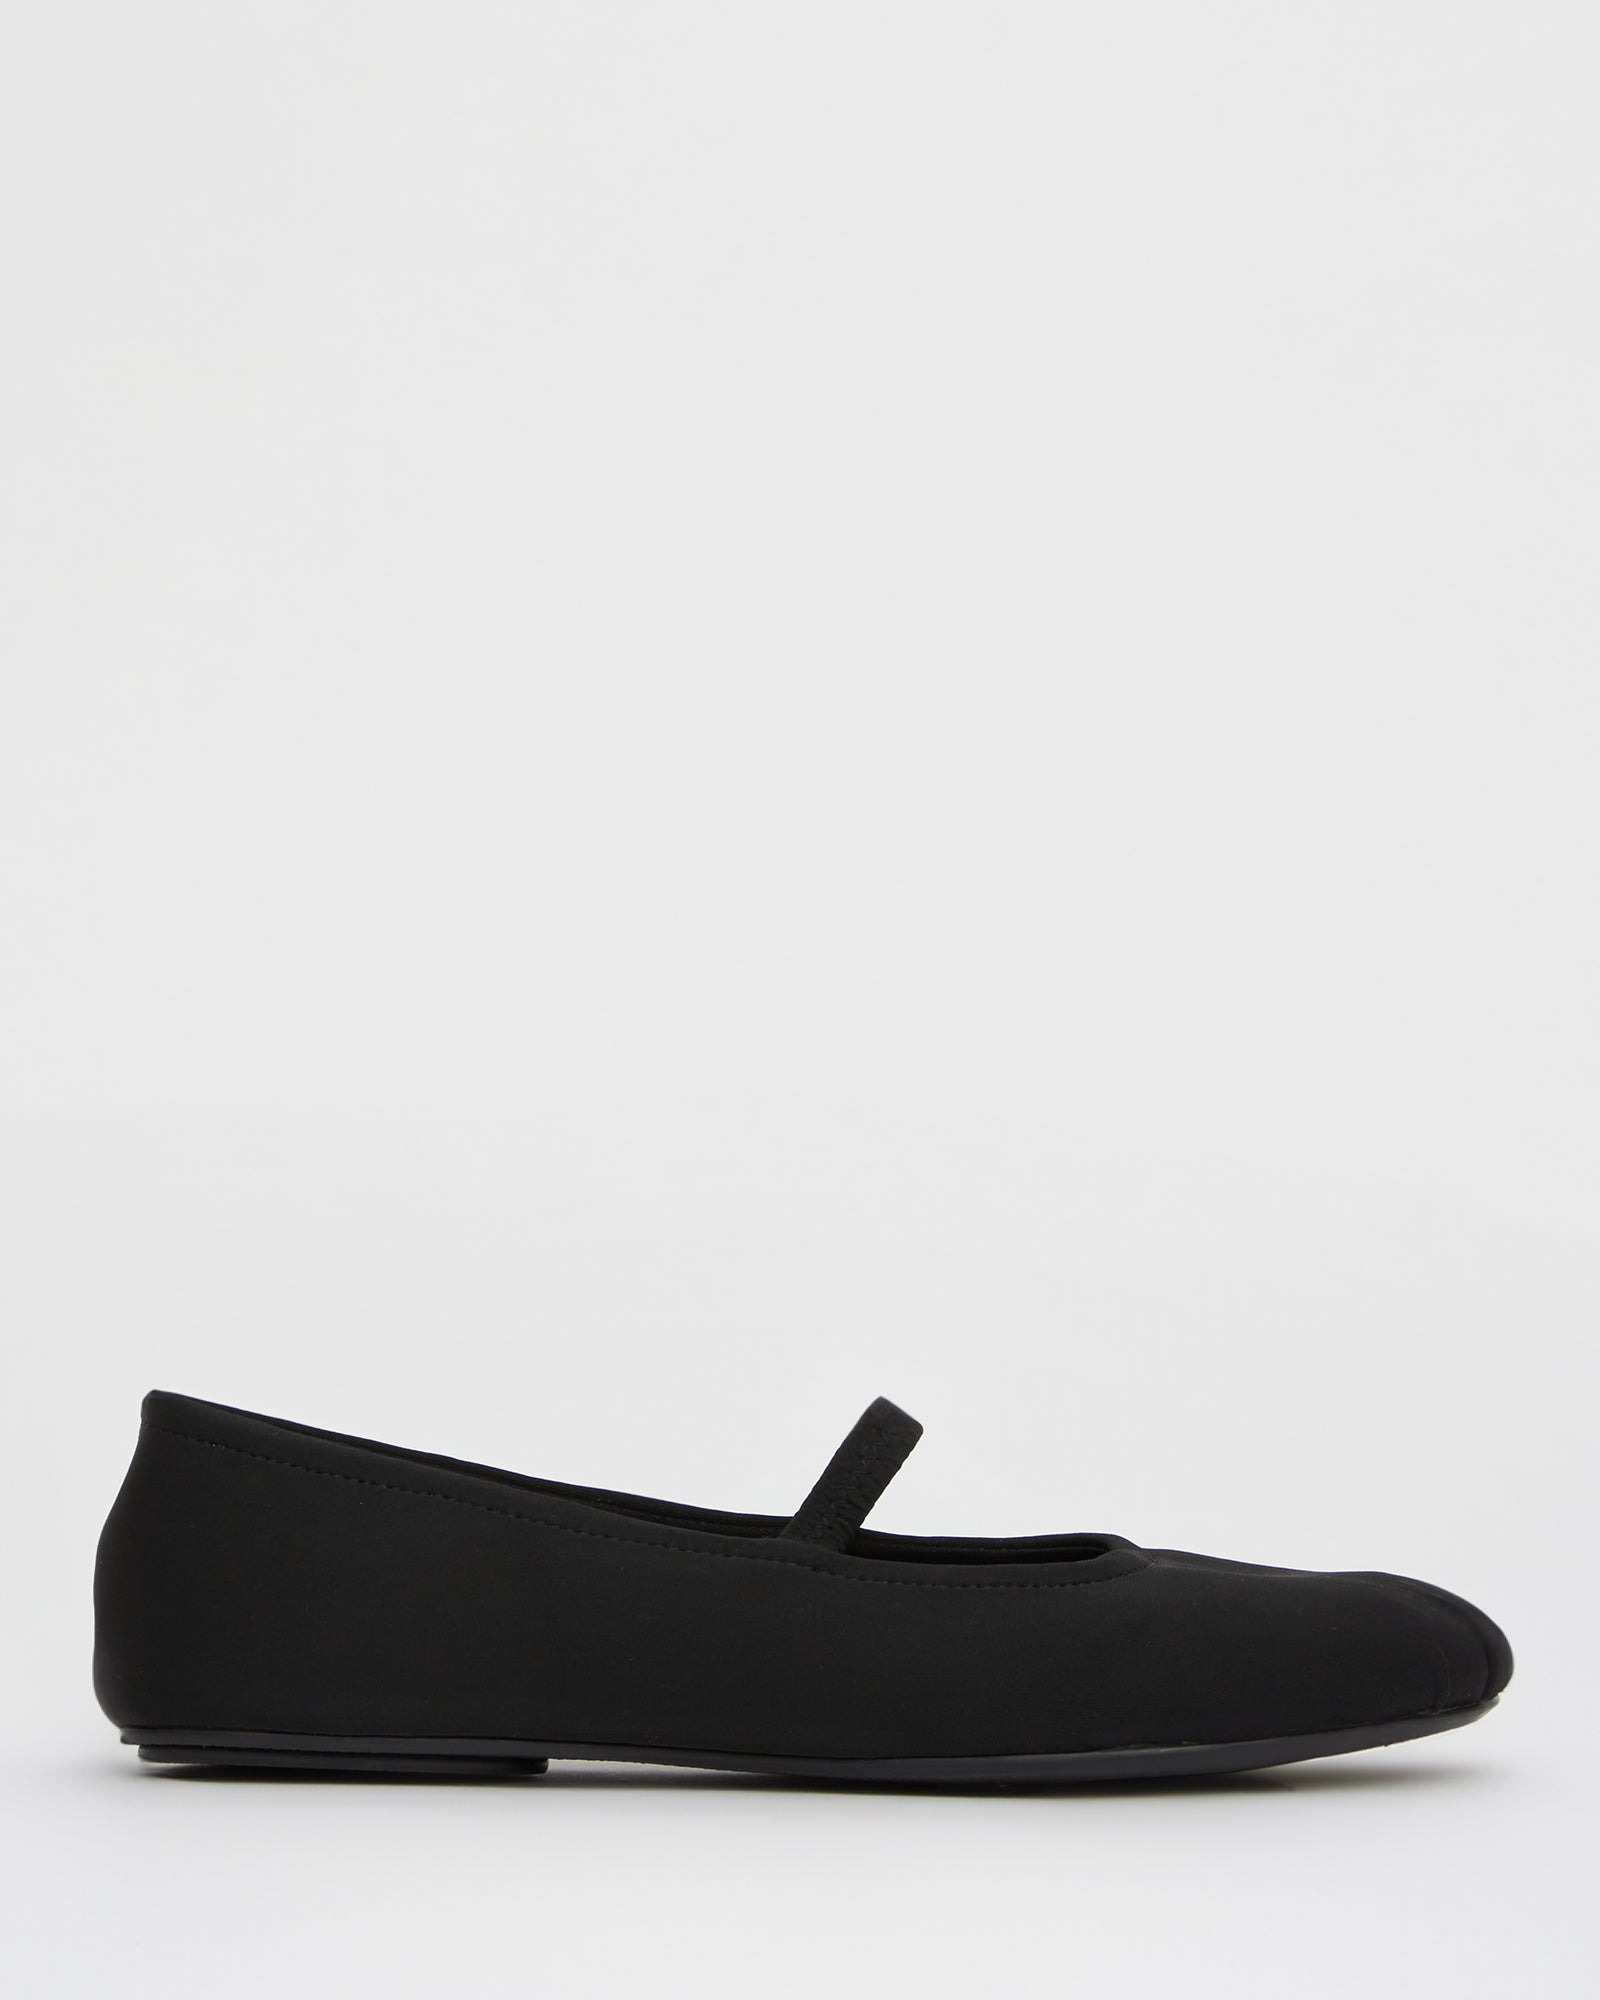 Buy BETHANY Ballet Flats by Betts online - Betts